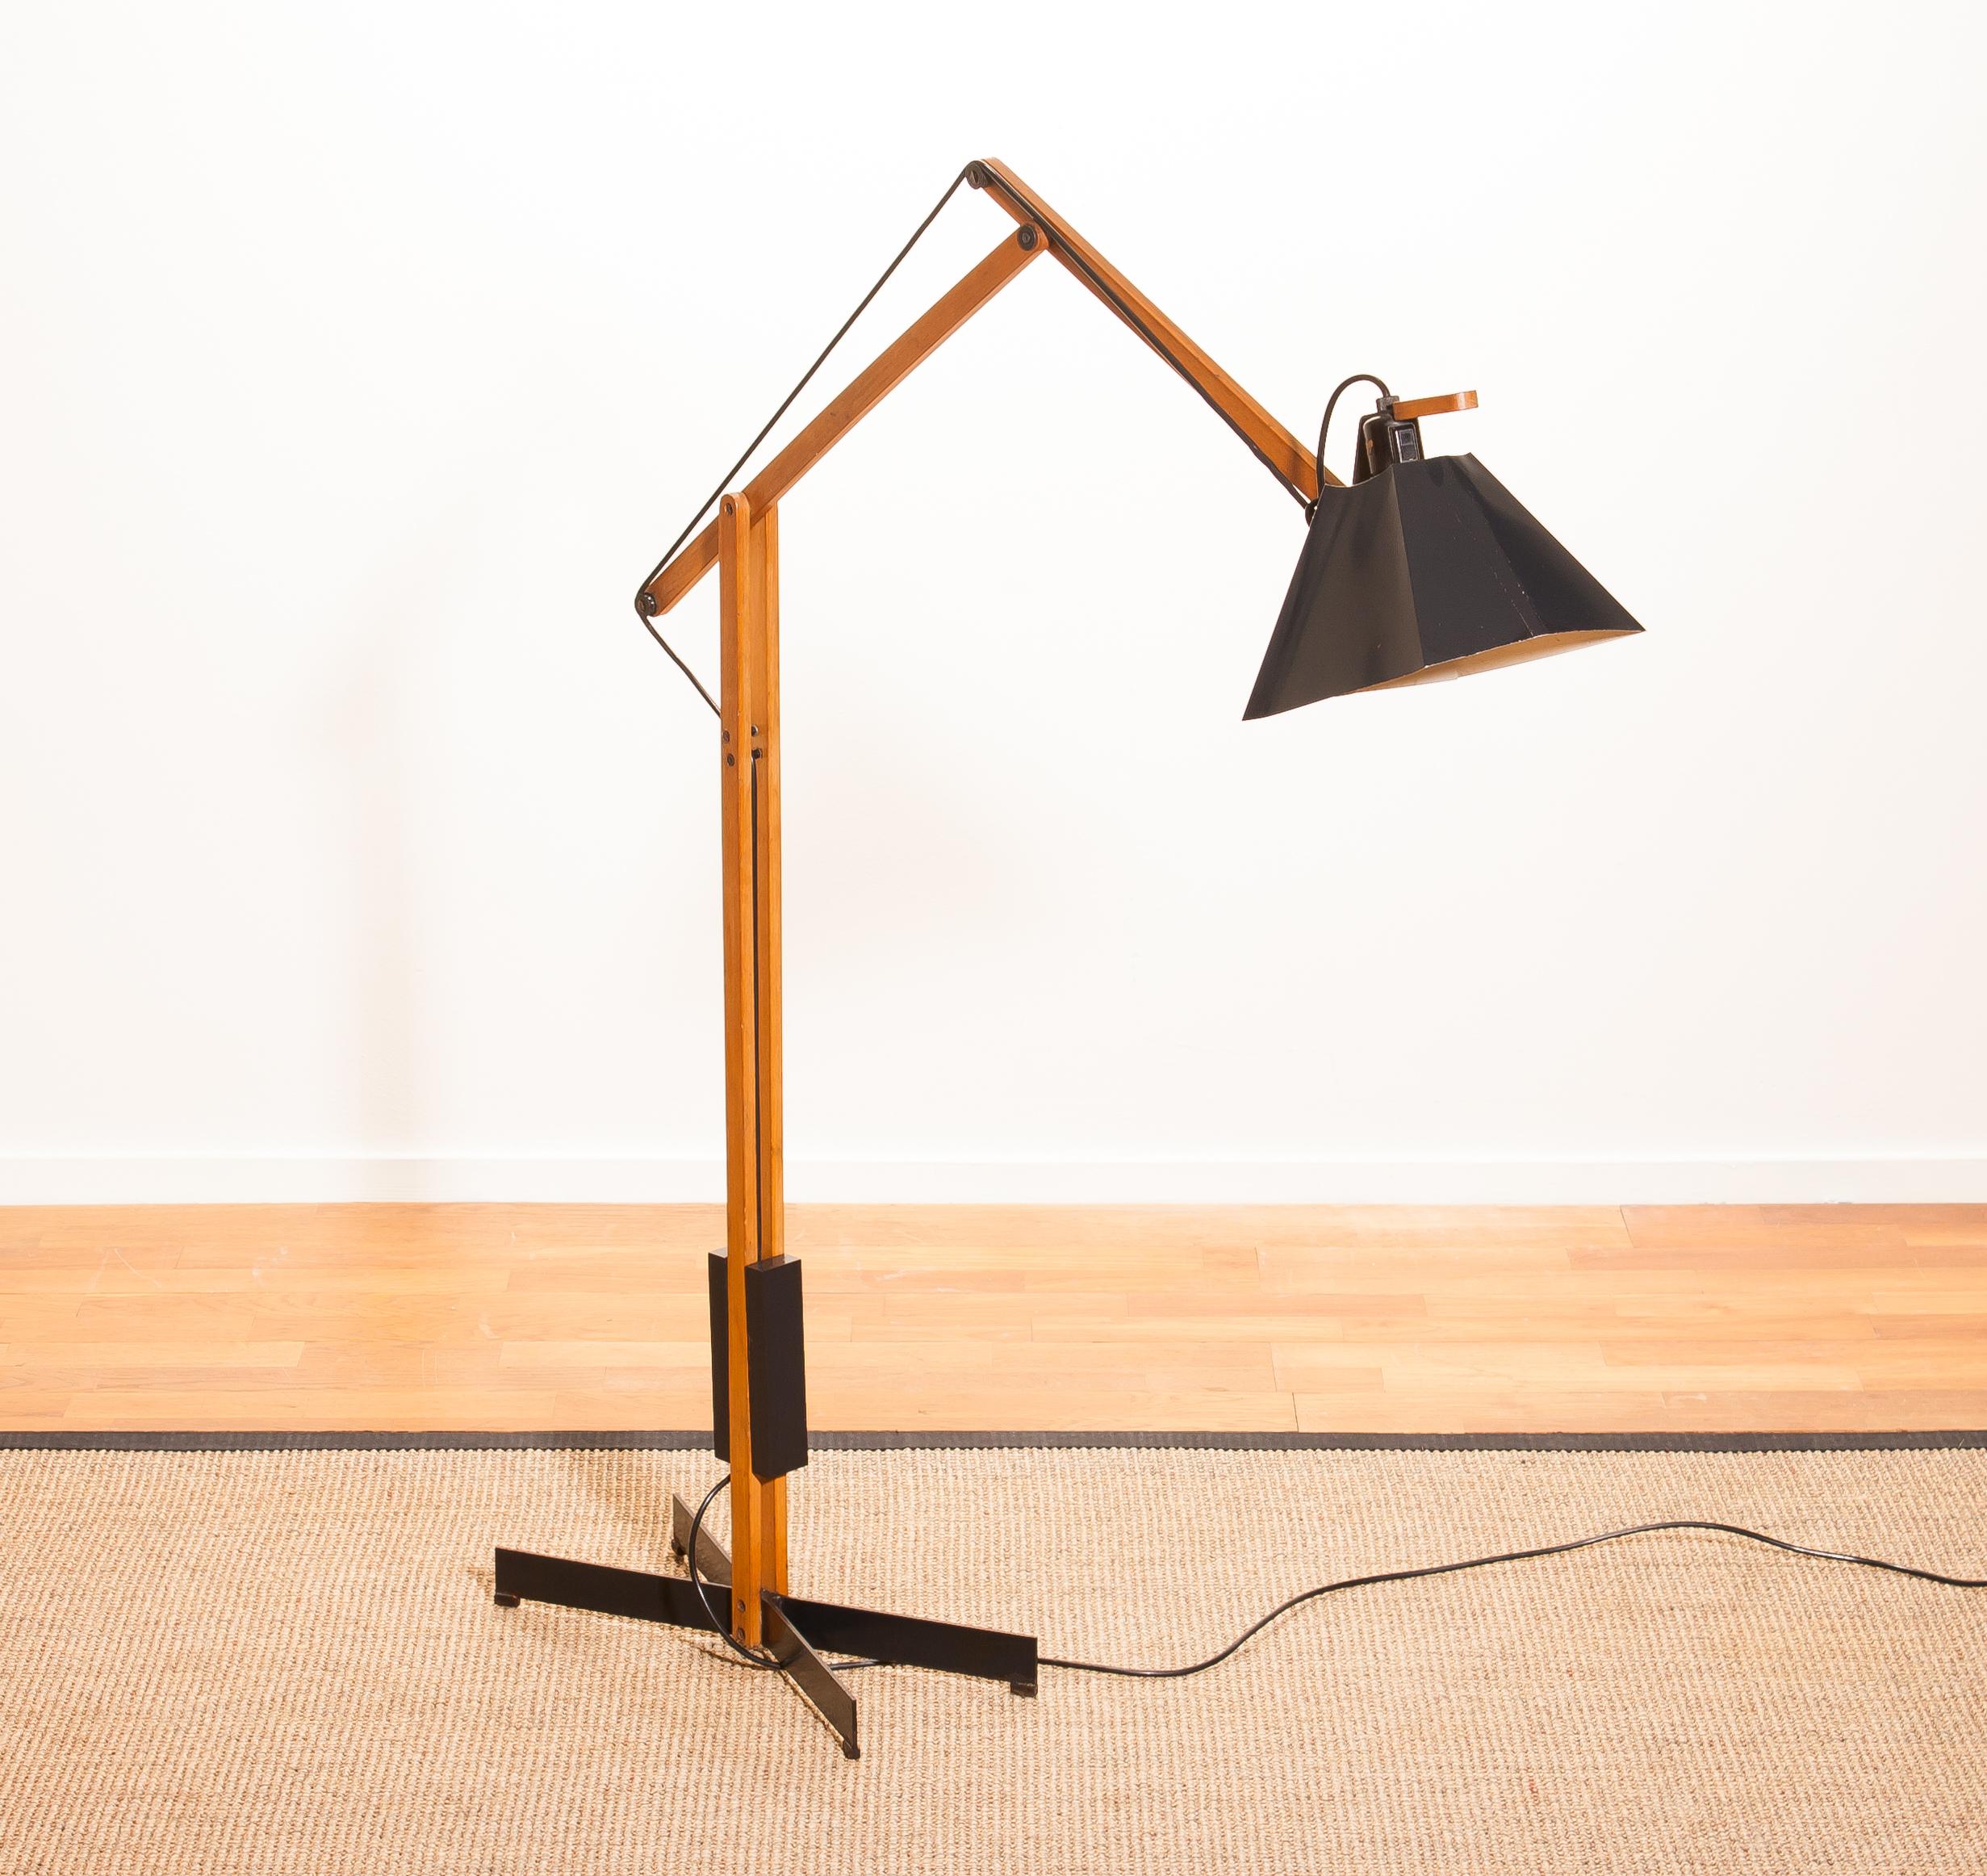 Magnificent rare floor lamp by Luxus, Sweden.
This lamp is adjustable by a counterbalance.
The stand is made of teak with a black lacquered shade.
It is labelled by Luxus and in a beautiful condition,
circa 1950s.
Dimensions: H 125 cm, D 90 cm,